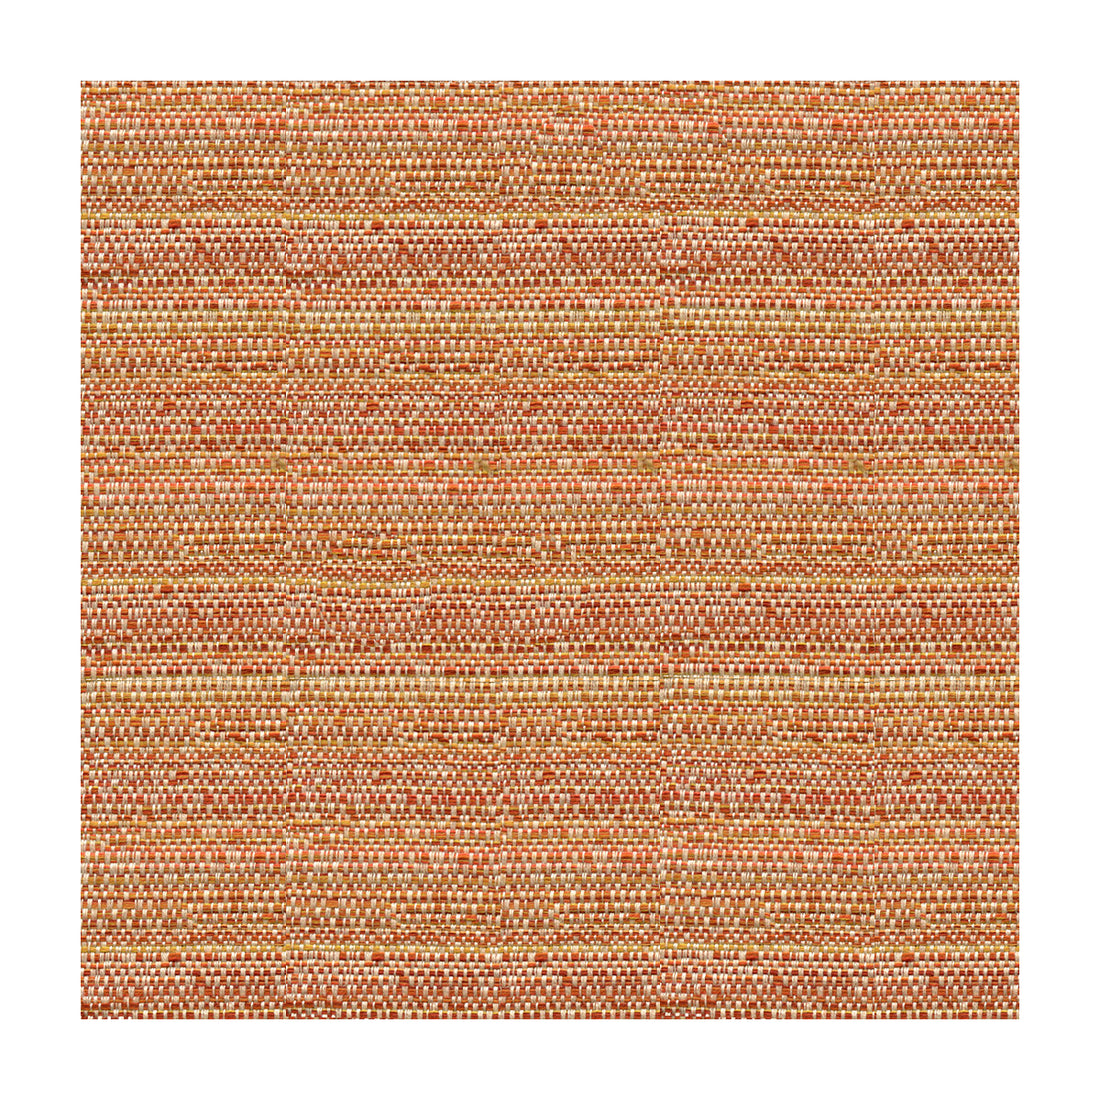 Melanger fabric in mandarin color - pattern 31695.12.0 - by Kravet Couture in the The Echo Design collection